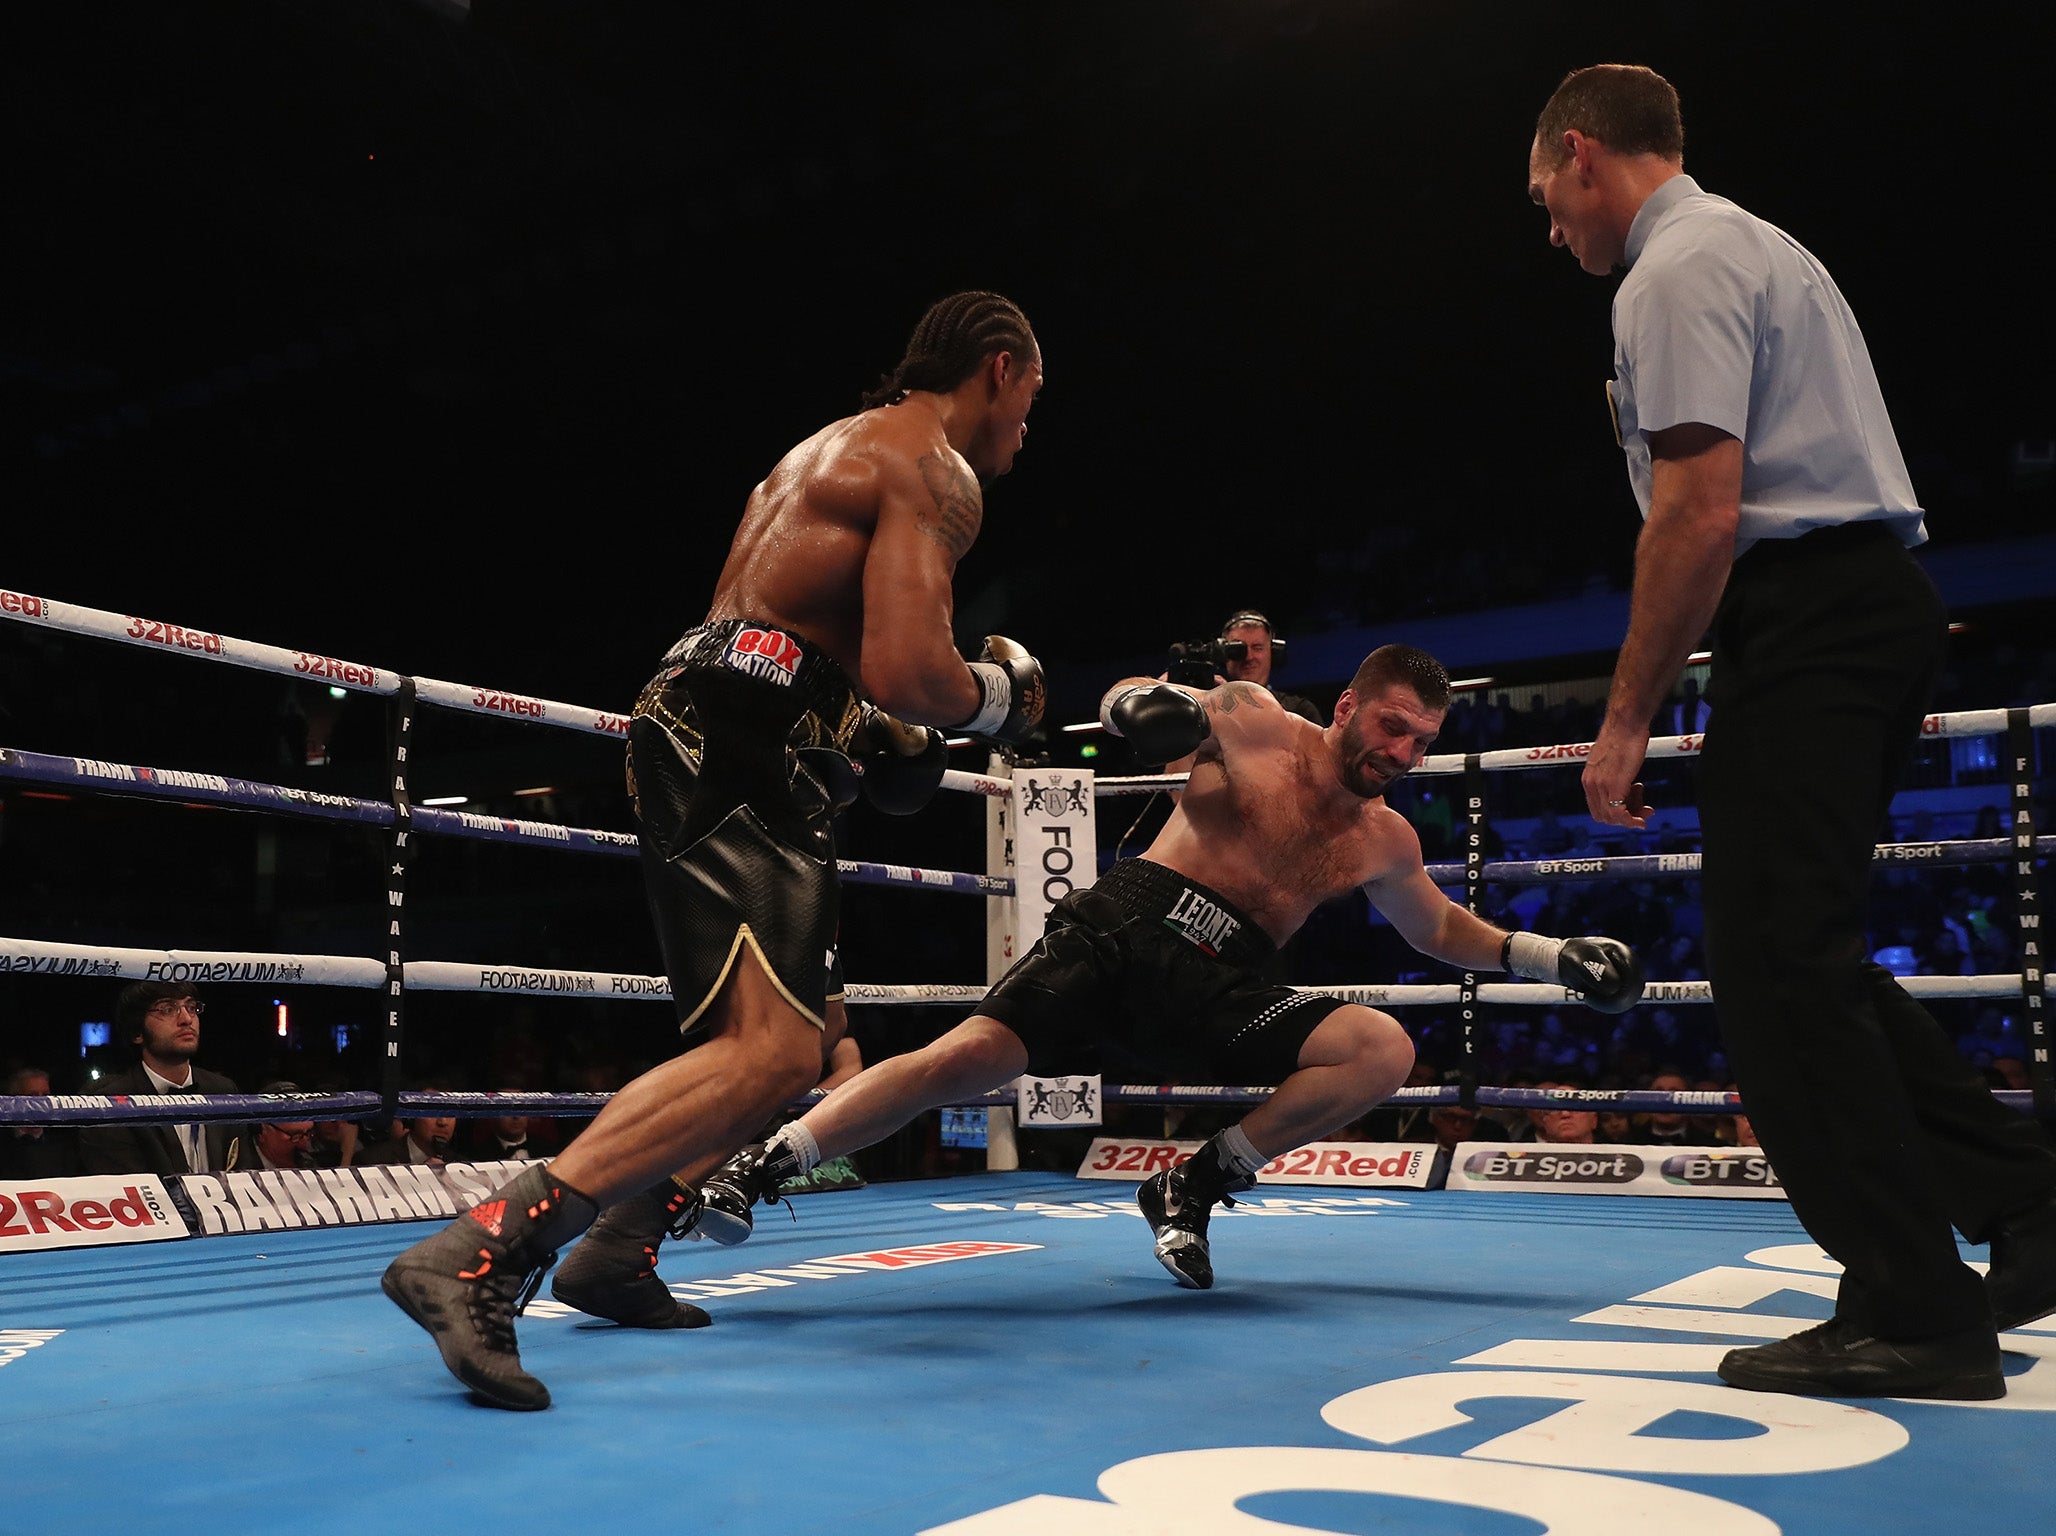 There was an impressive knockout win for Yarde